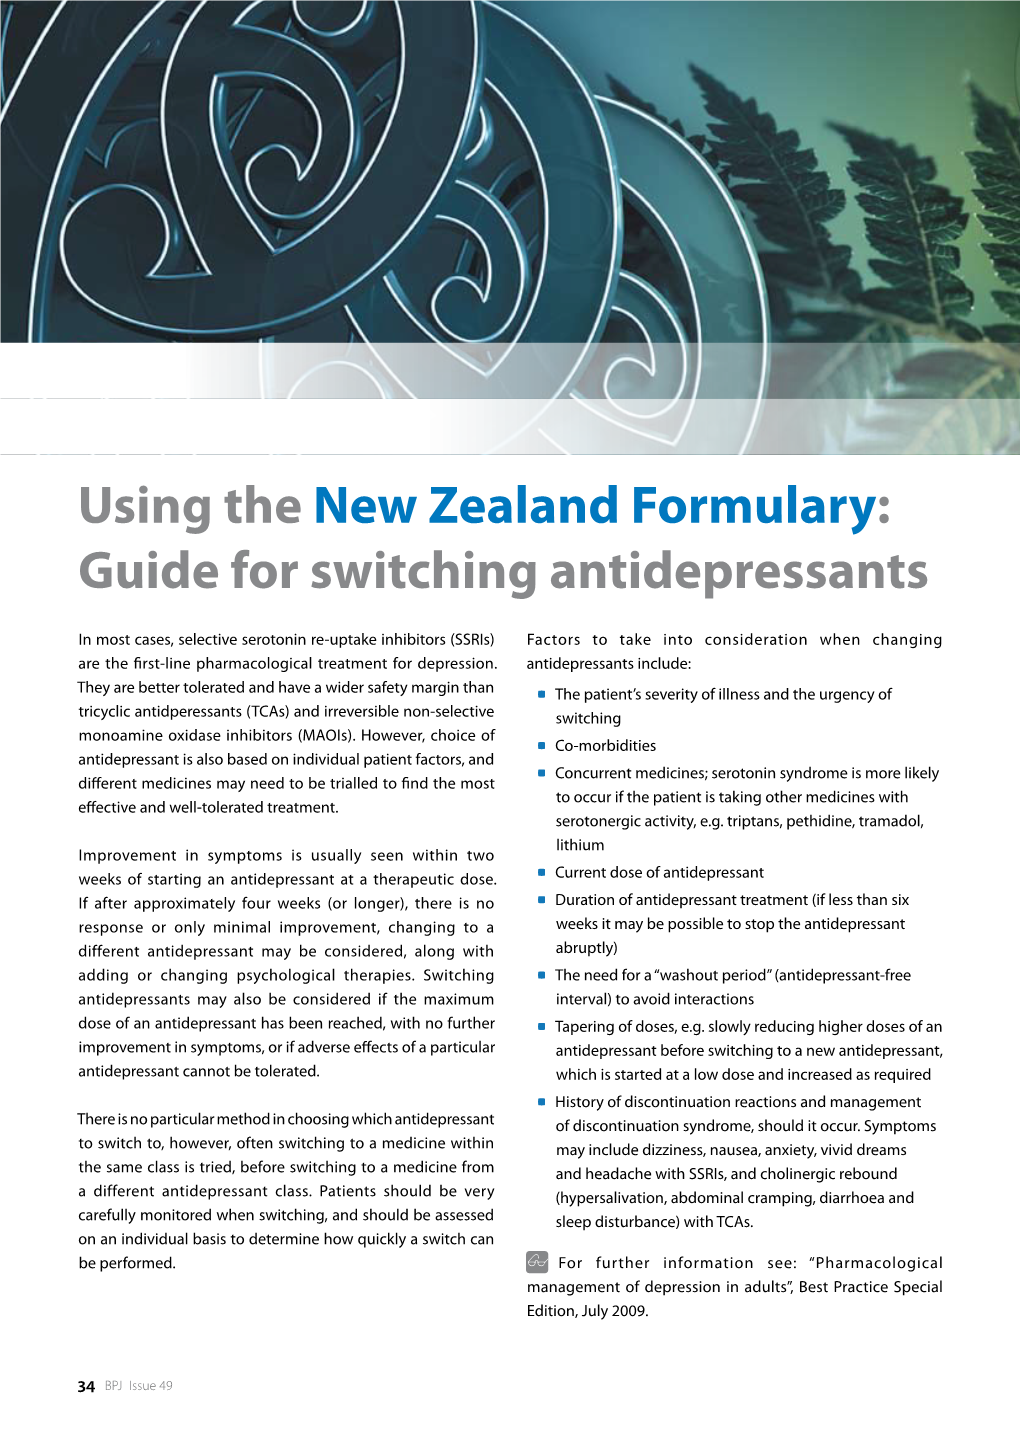 Using the New Zealand Formulary: Guide for Switching Antidepressants